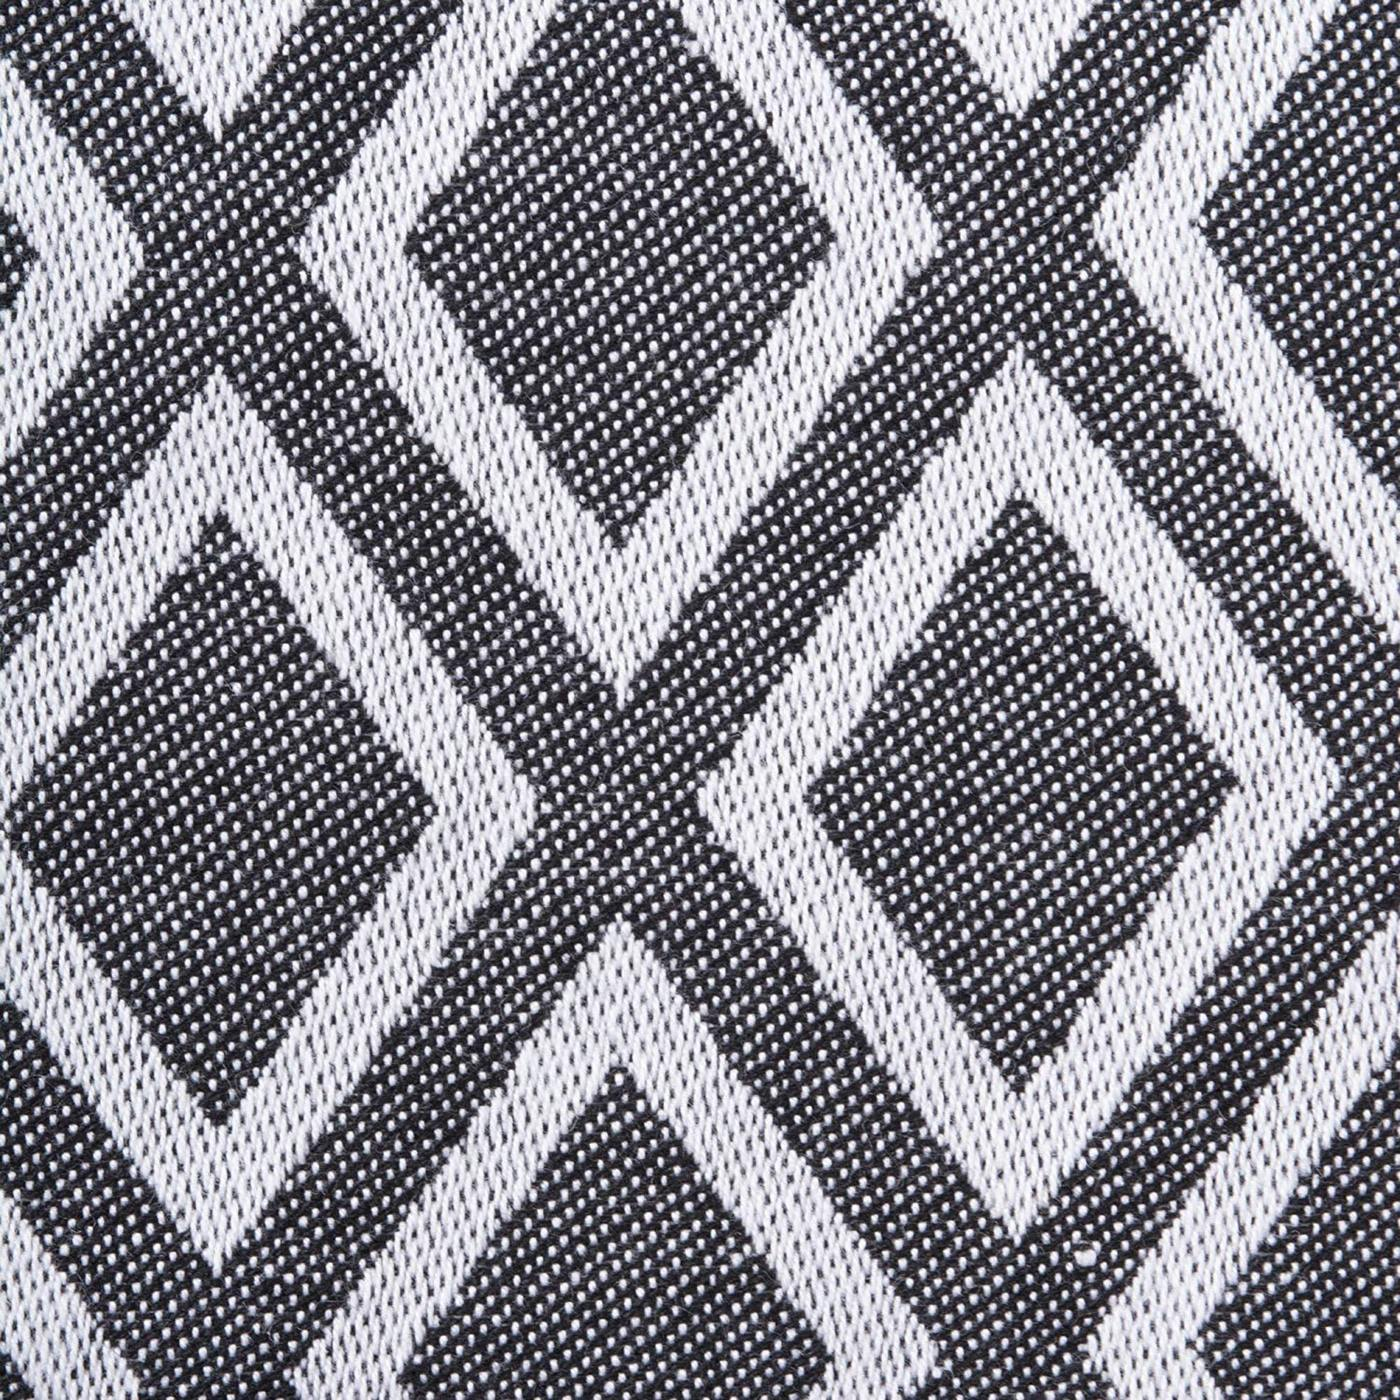 Black and White Diamond Pattern Table Runner - 108 inches